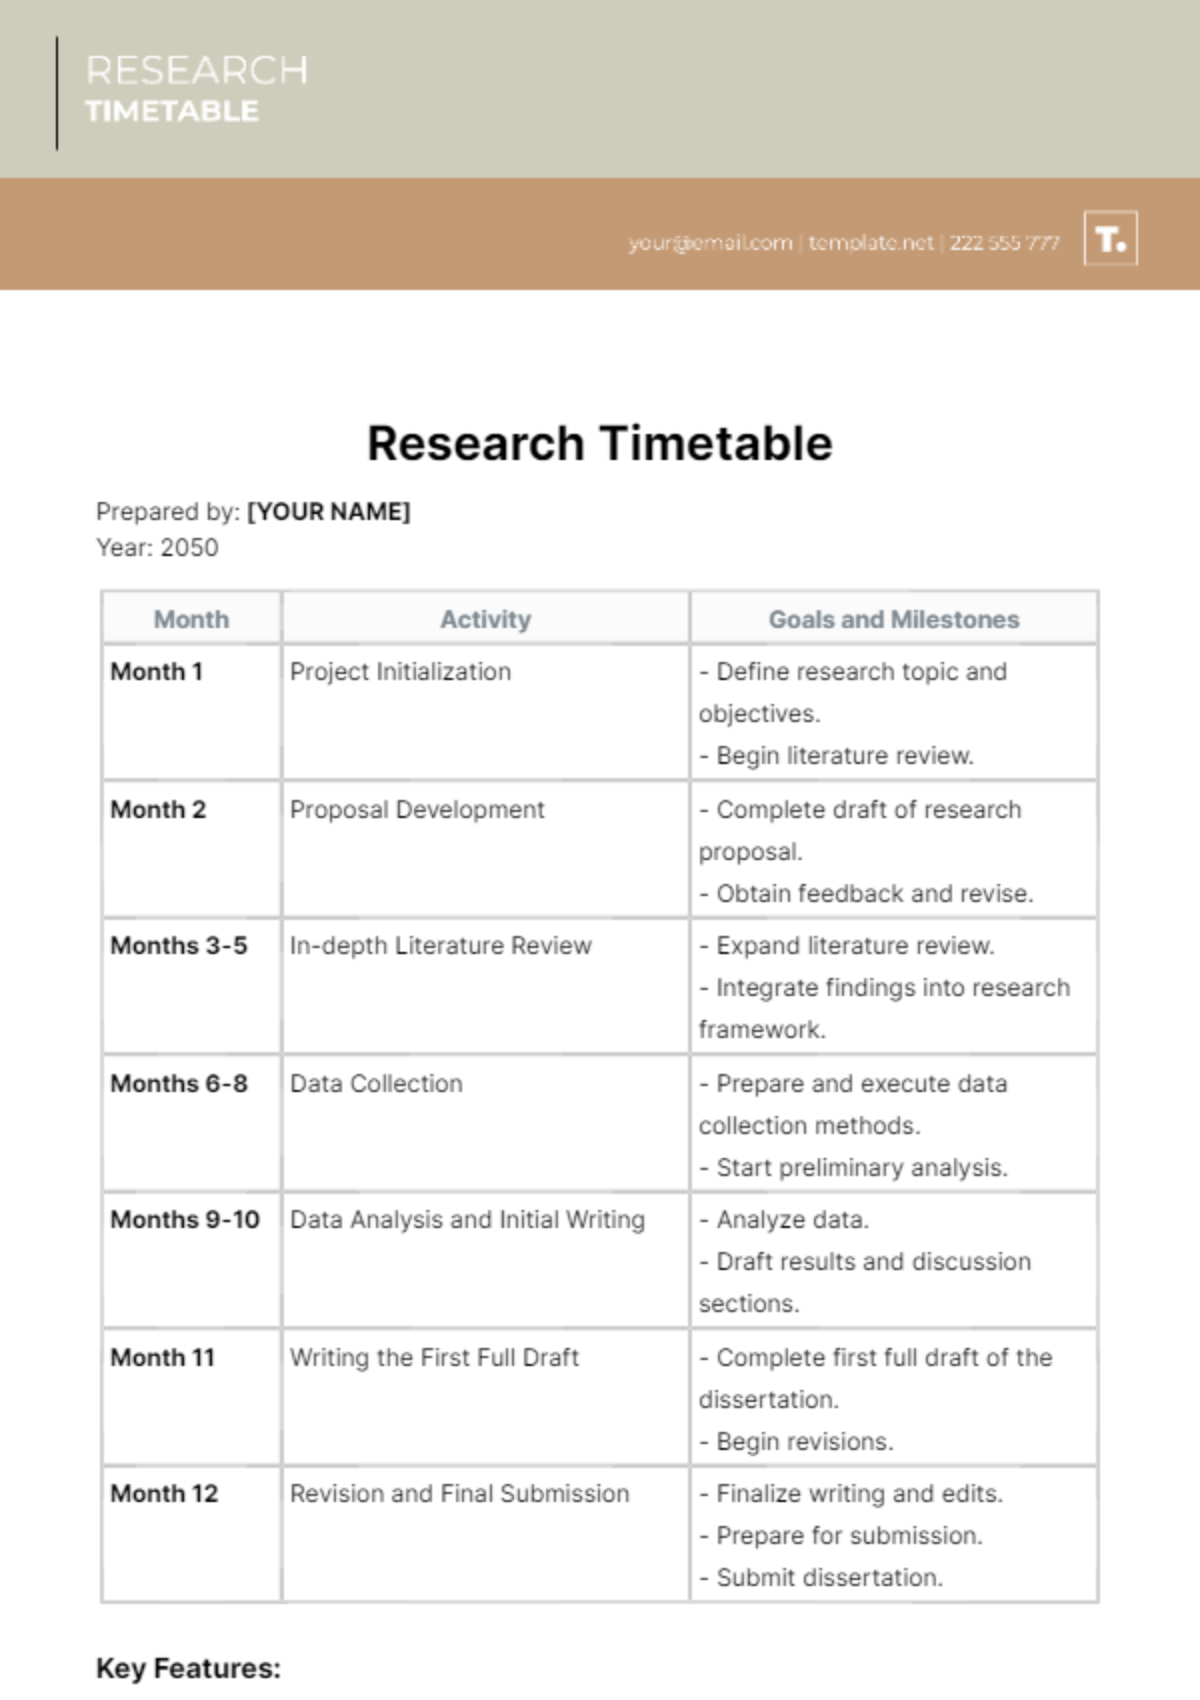 Free Research Timetable Template